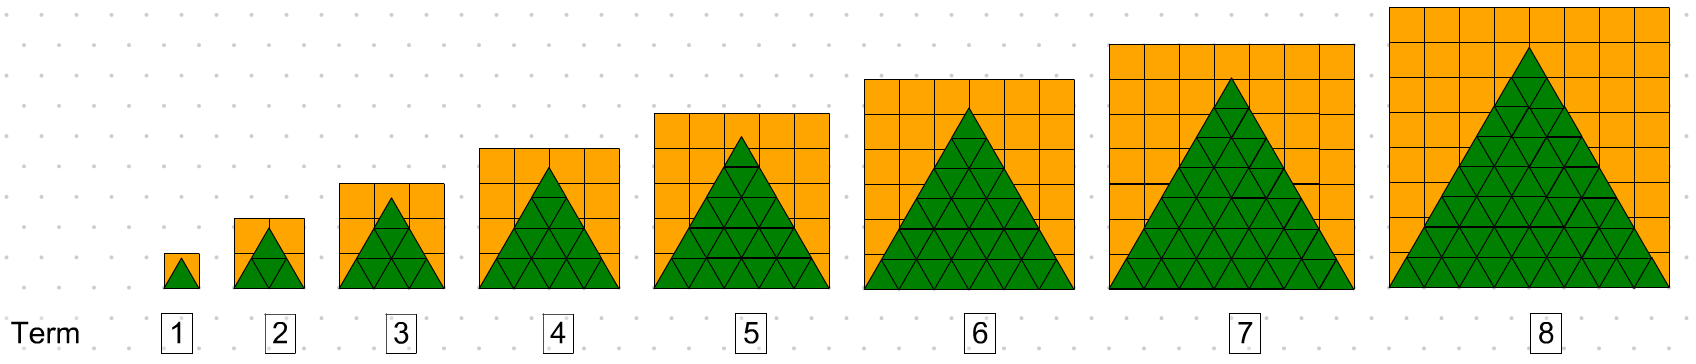 Sequence of triangles inside squares